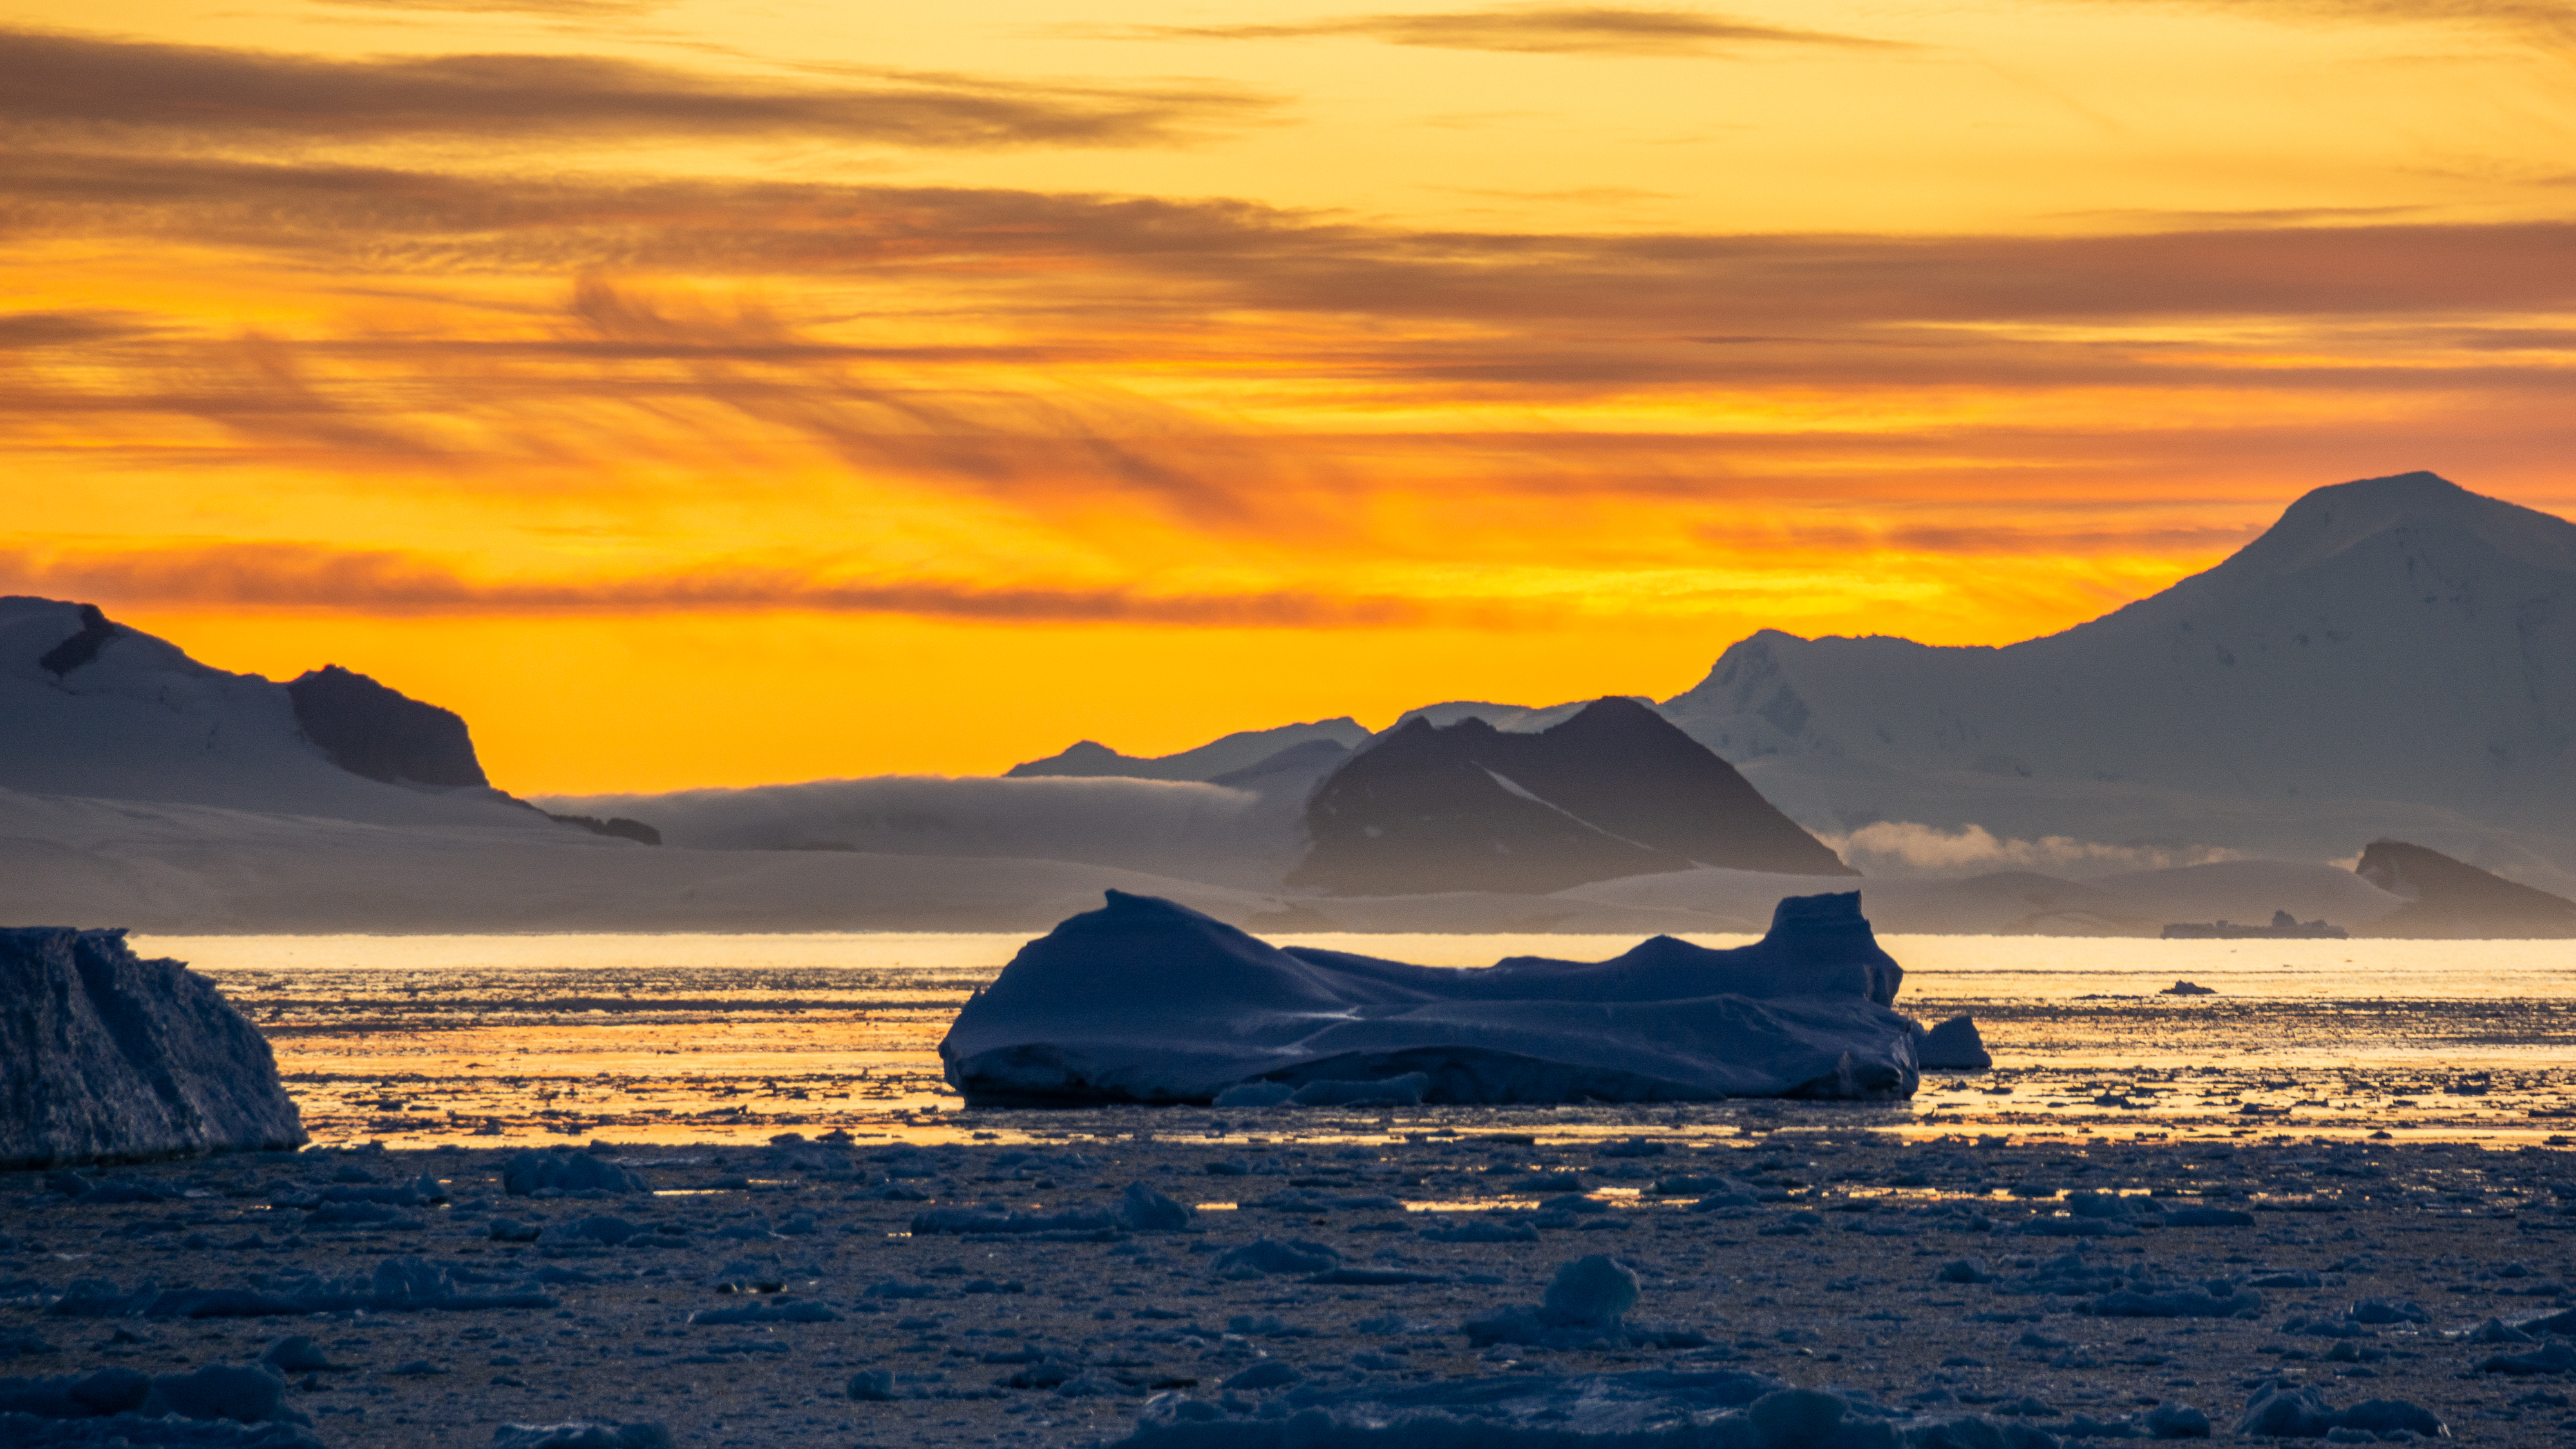 The sunsets over an iceberg-filled harbor.